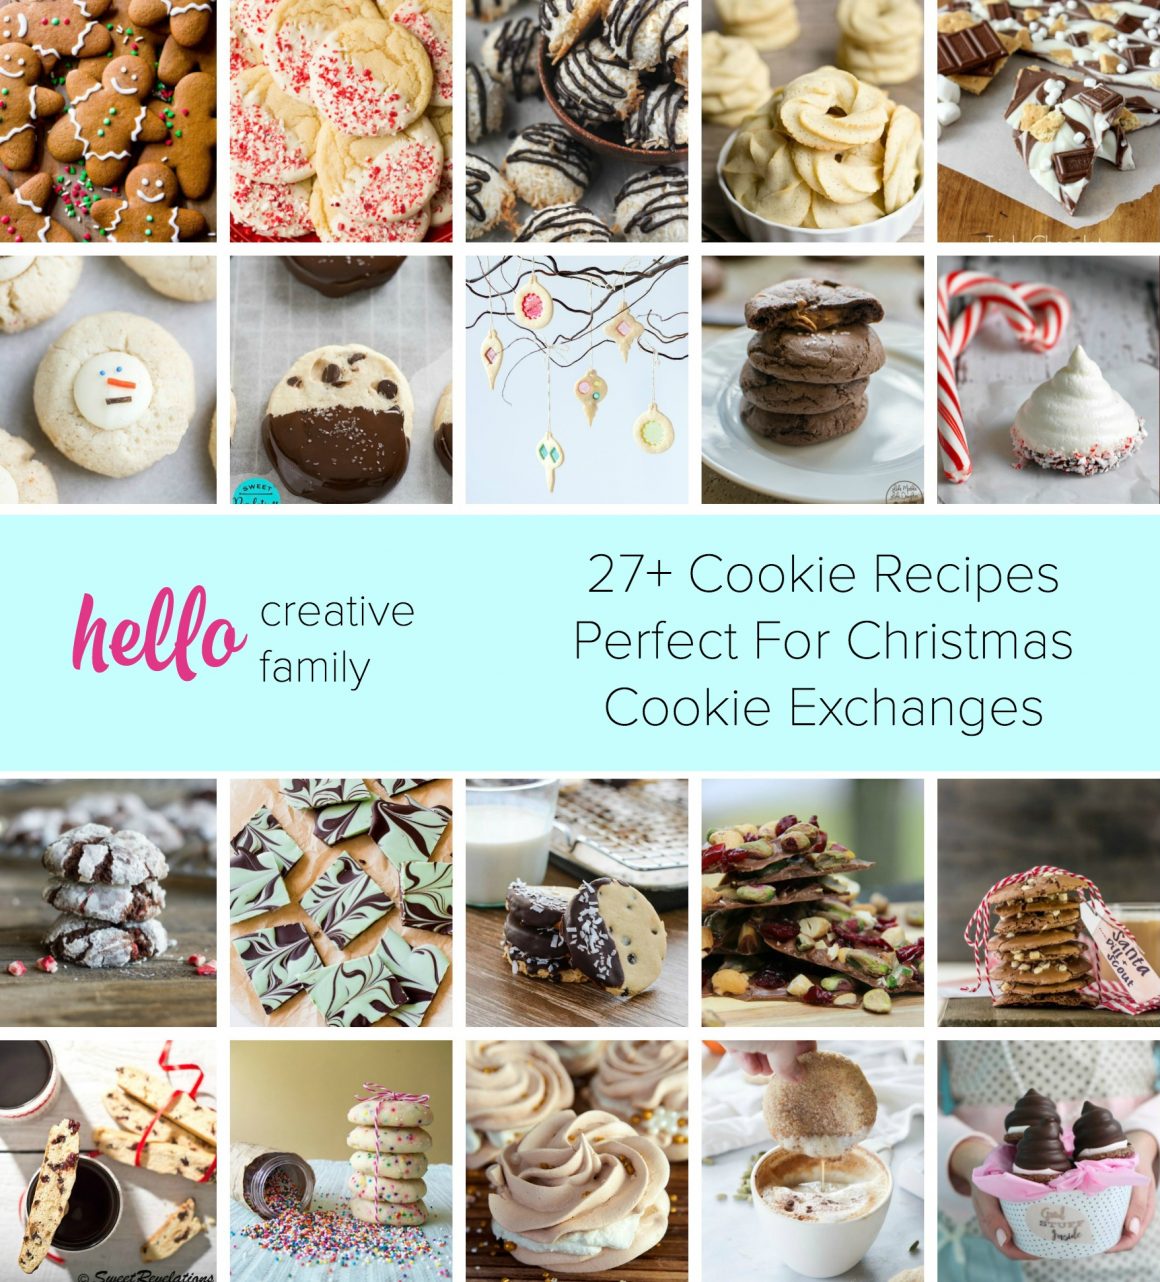 Looking for cookies, barks or biscotti recipes for your next Christmas cookie exchange? Here are 27 delicious cookie recipes that are perfect for cookie exchanges or handmade gifts.